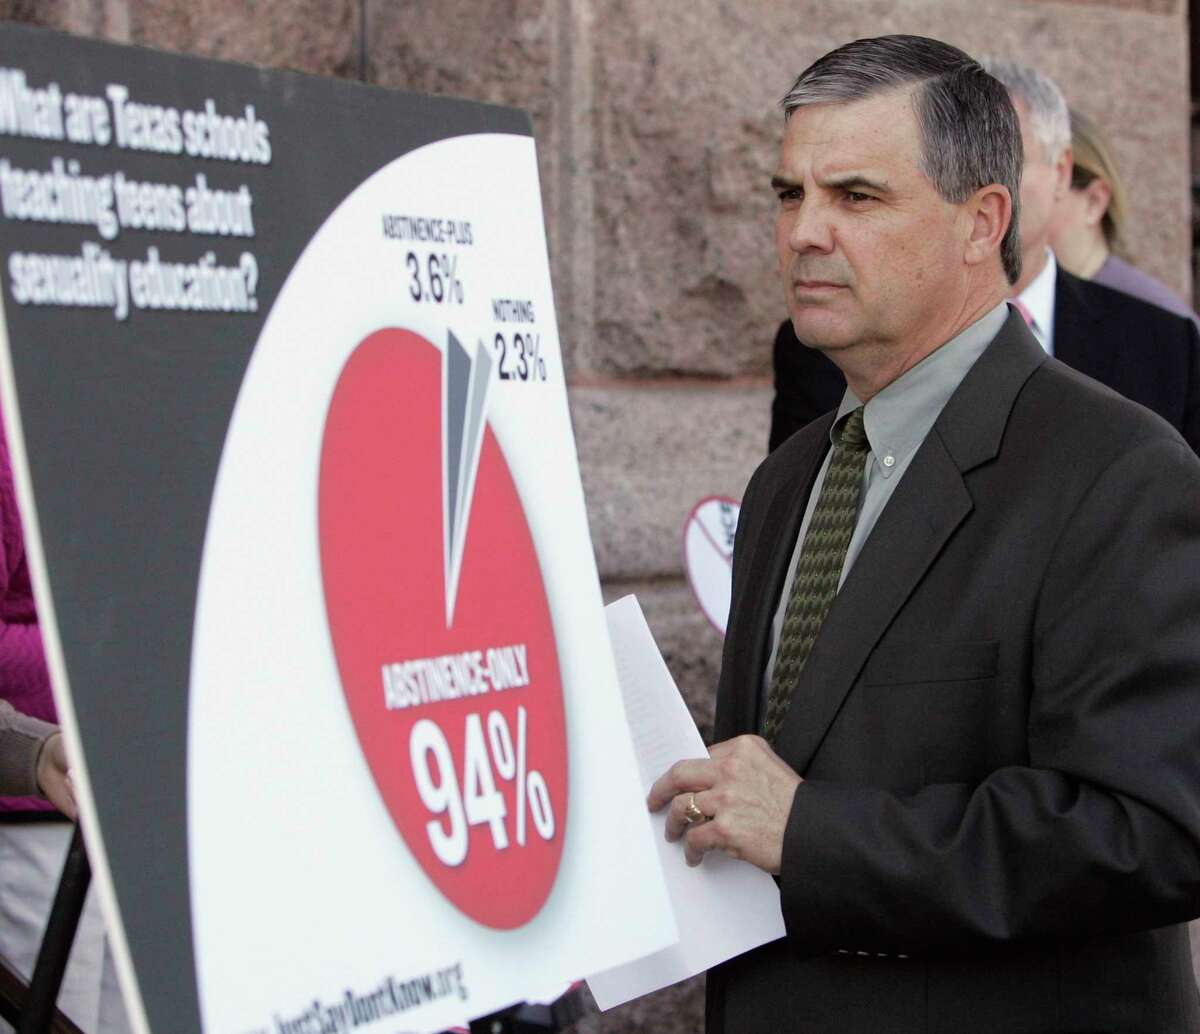 David Wiley, professor of health education at Texas State University-San Marcos, pauses before speaking at a Texas Freedom Network news conference outside the Capitol Tuesday, Feb. 24, 2009, in Austin, Texas. He presented research that shows Texas is failing families and teens when it comes to sex education. The Texas Freedom Network is a watchdog group that focuses on public education, religious freedom and individual liberties. (AP Photo/Harry Cabluck)